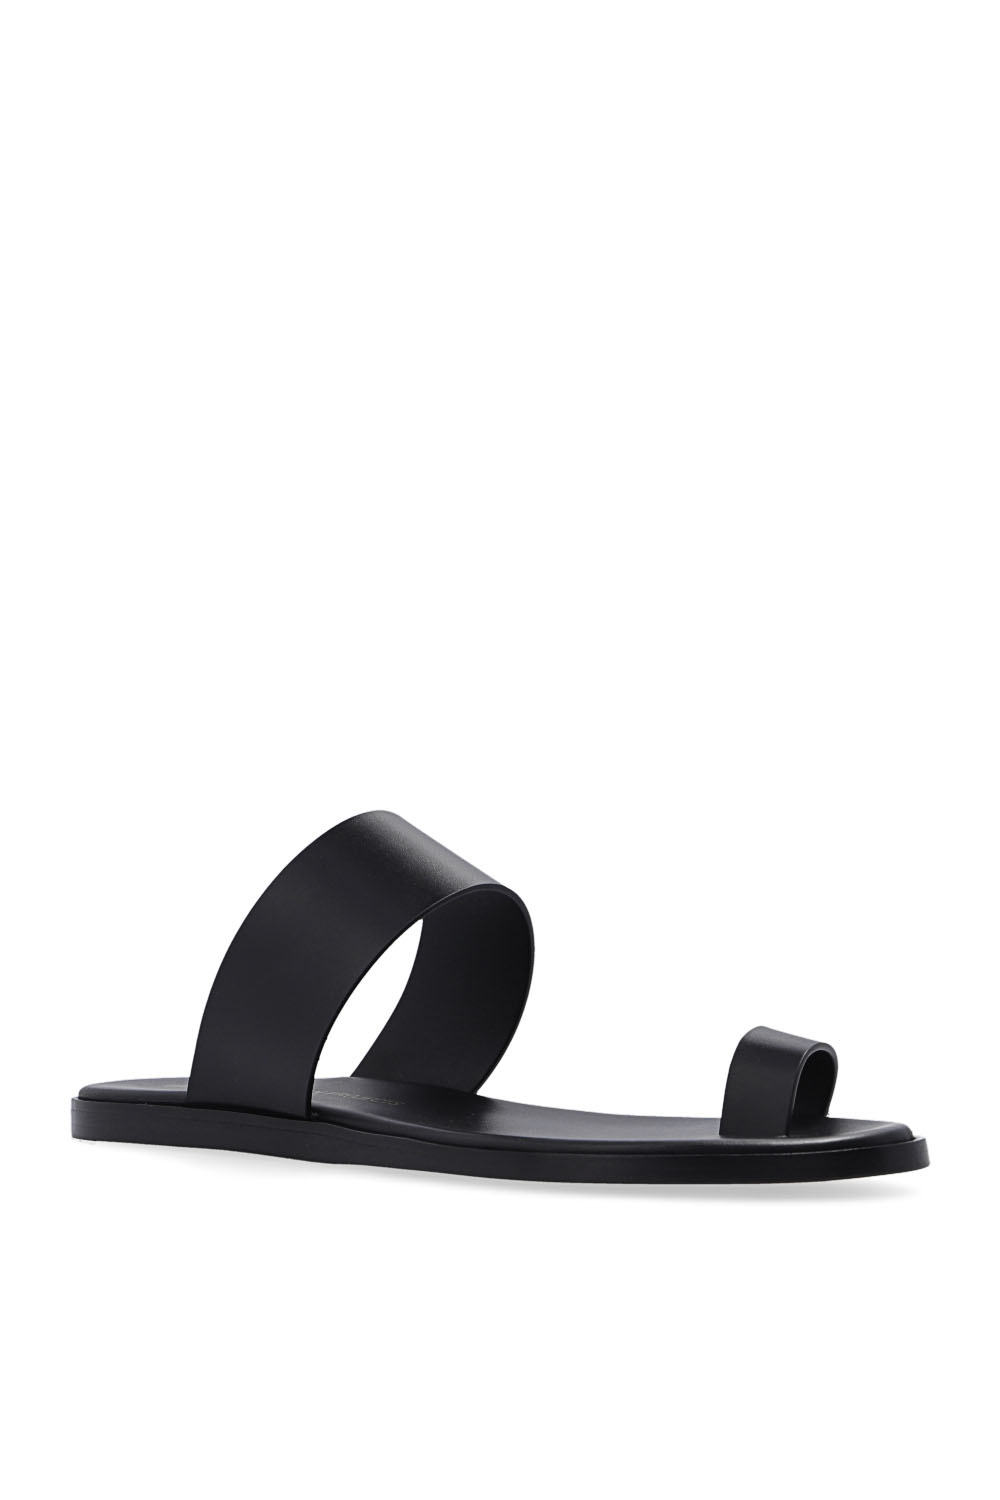 Common Projects ‘Minimalist’ leather slides